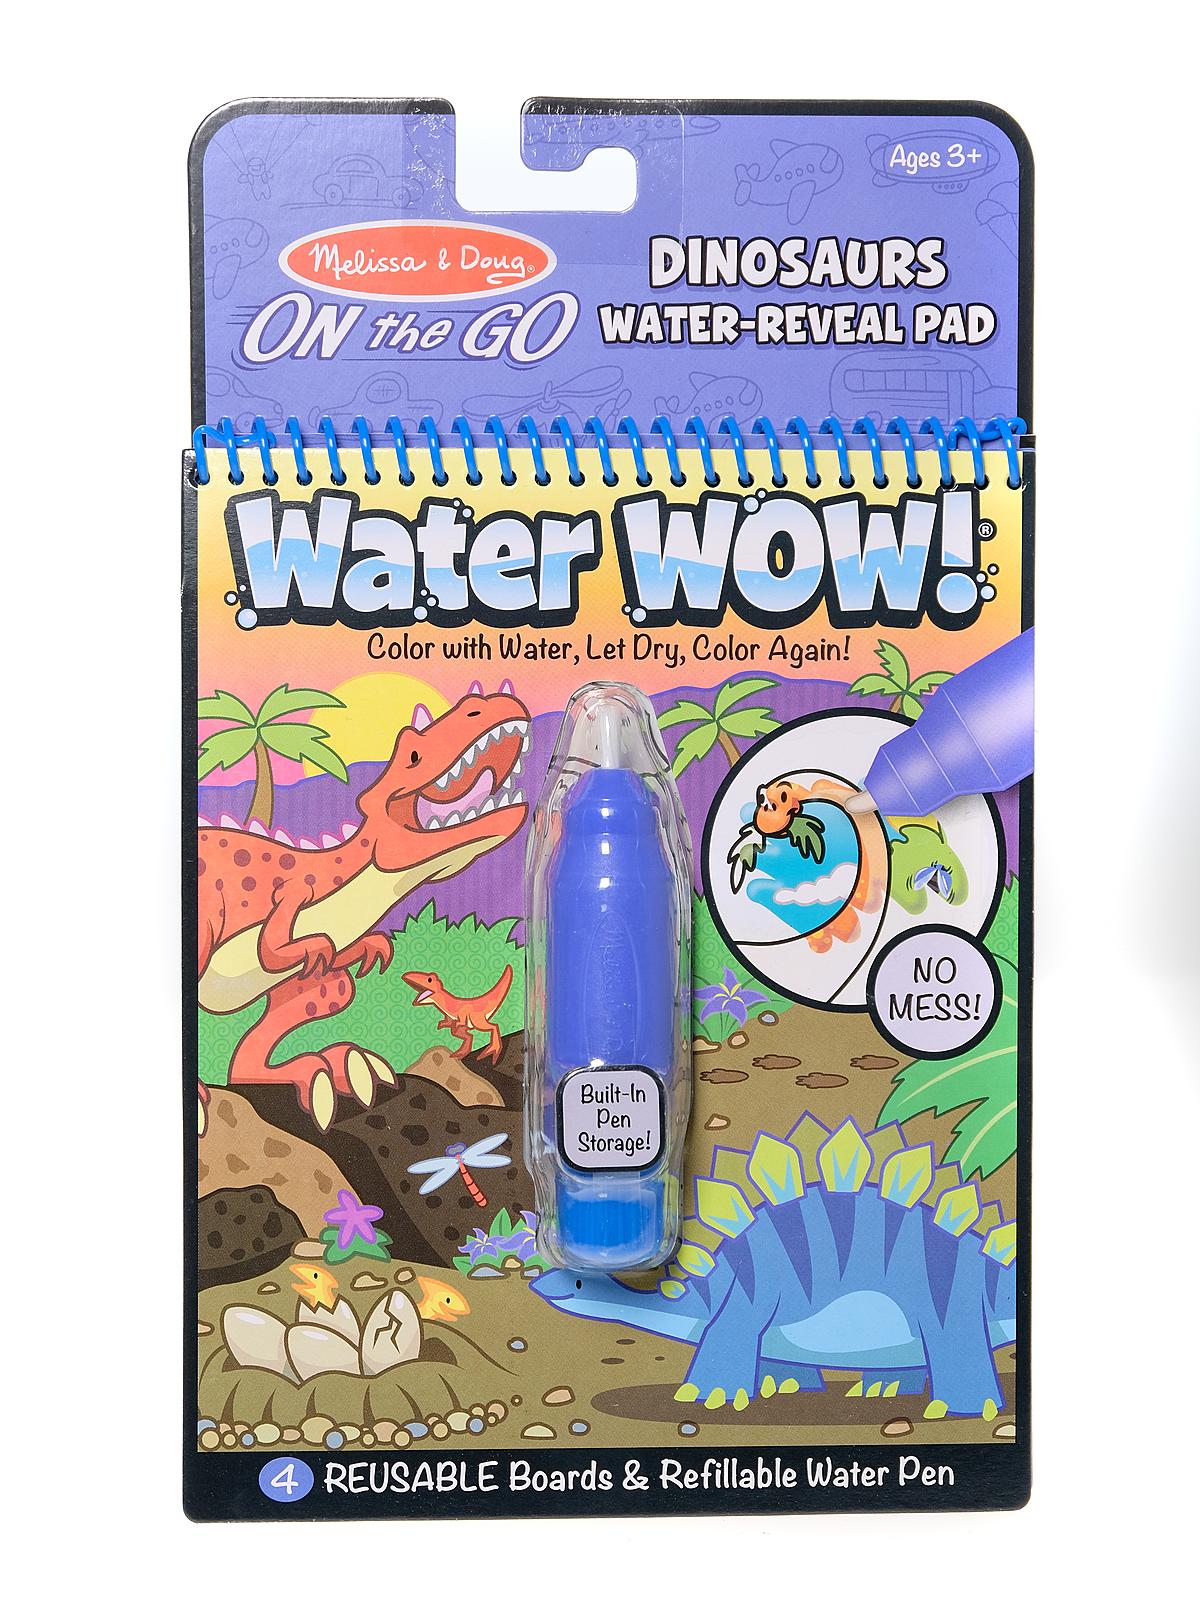 On The Go Water Wow Dinosaurs